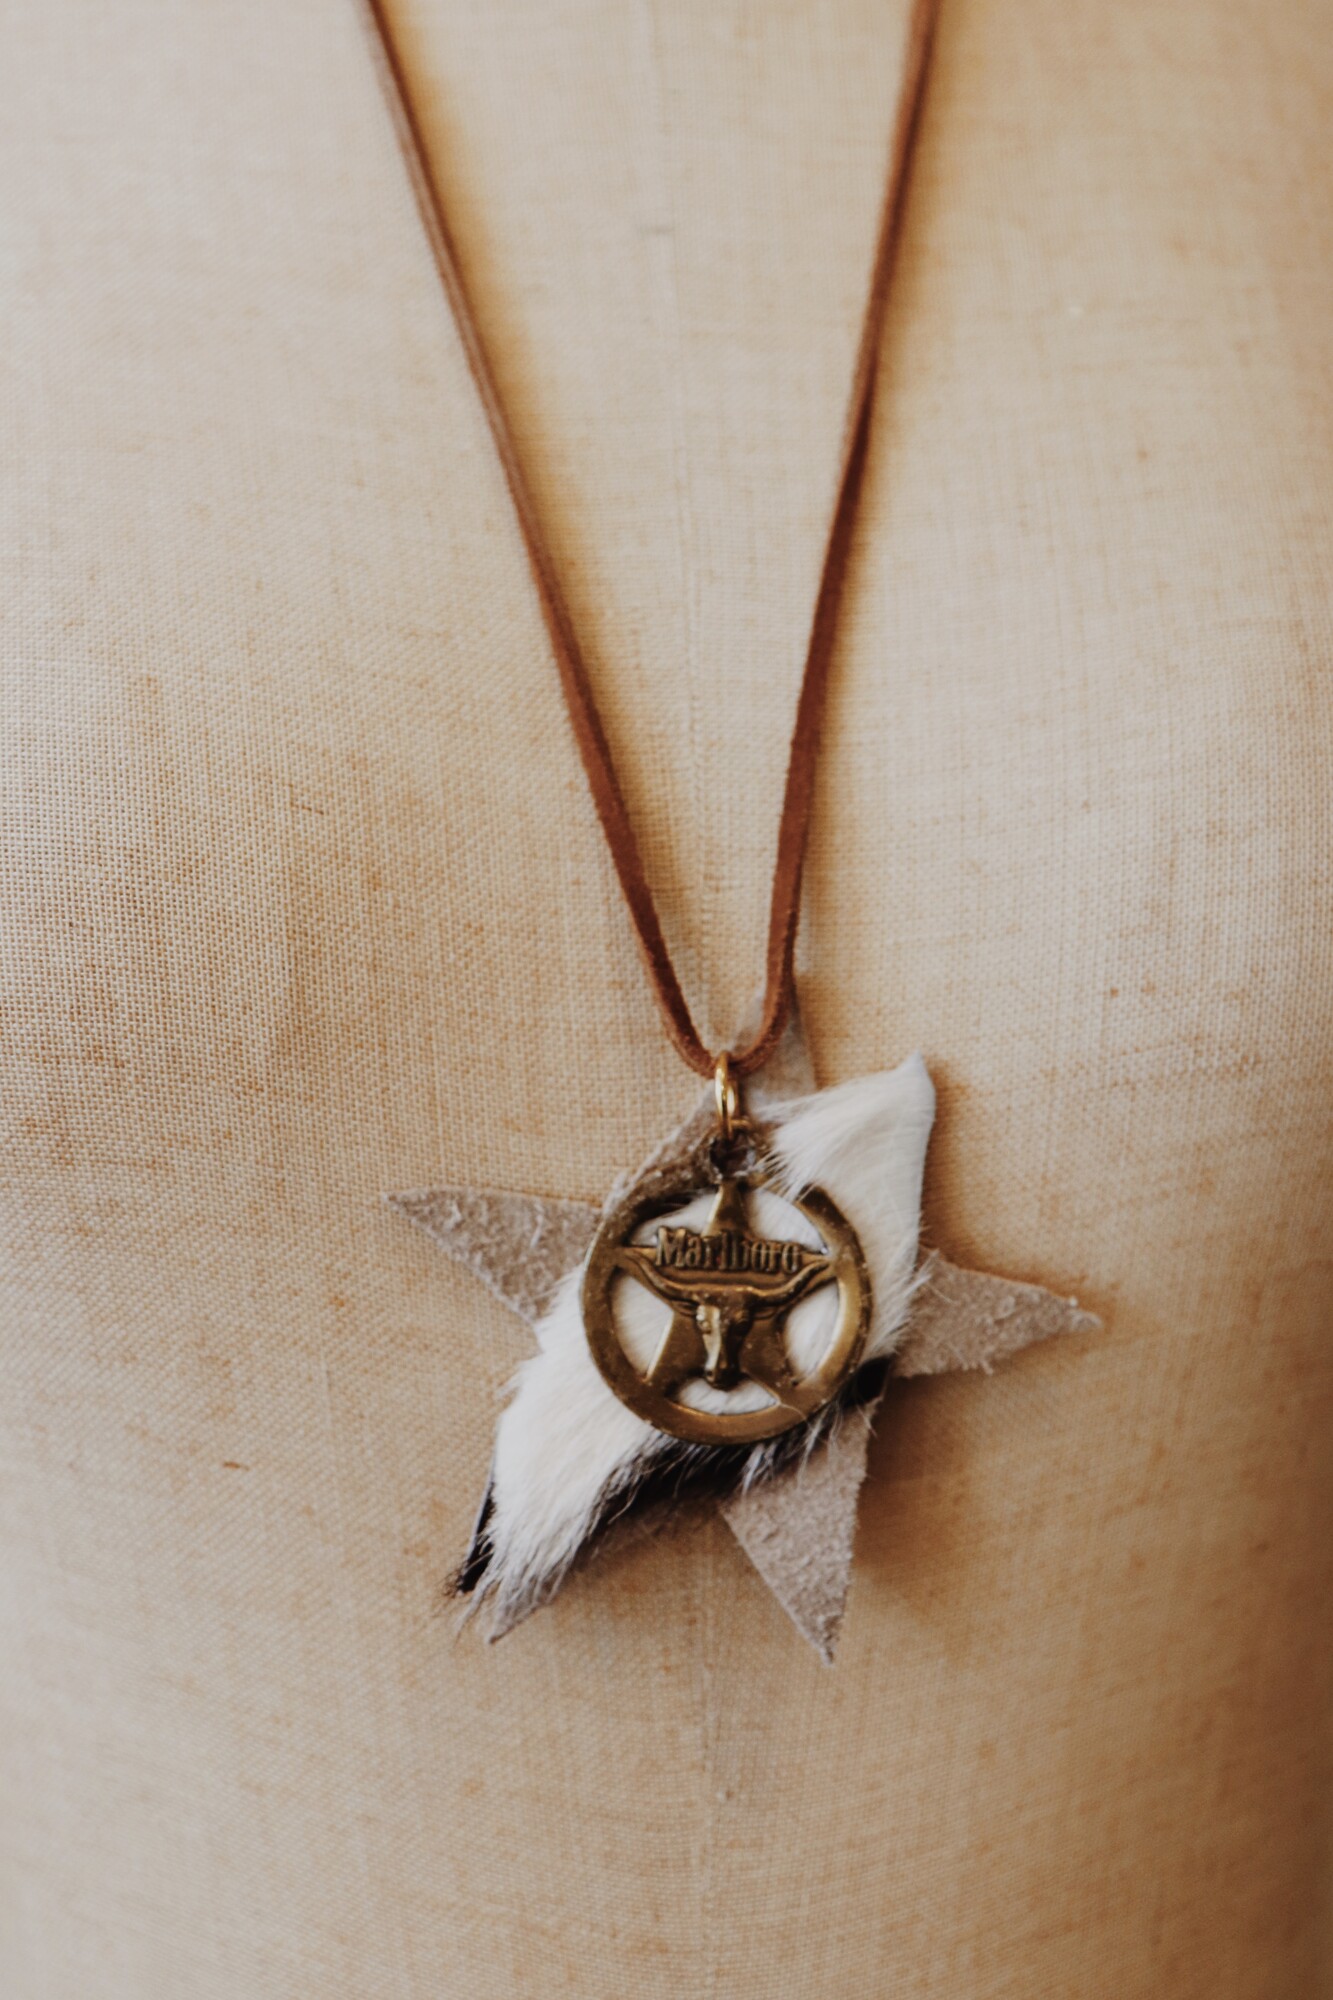 This Kelli Hawk Designs necklace is on a 29 inch leather cord and has a vintage Marlboro metal piece on leather as the pendant!